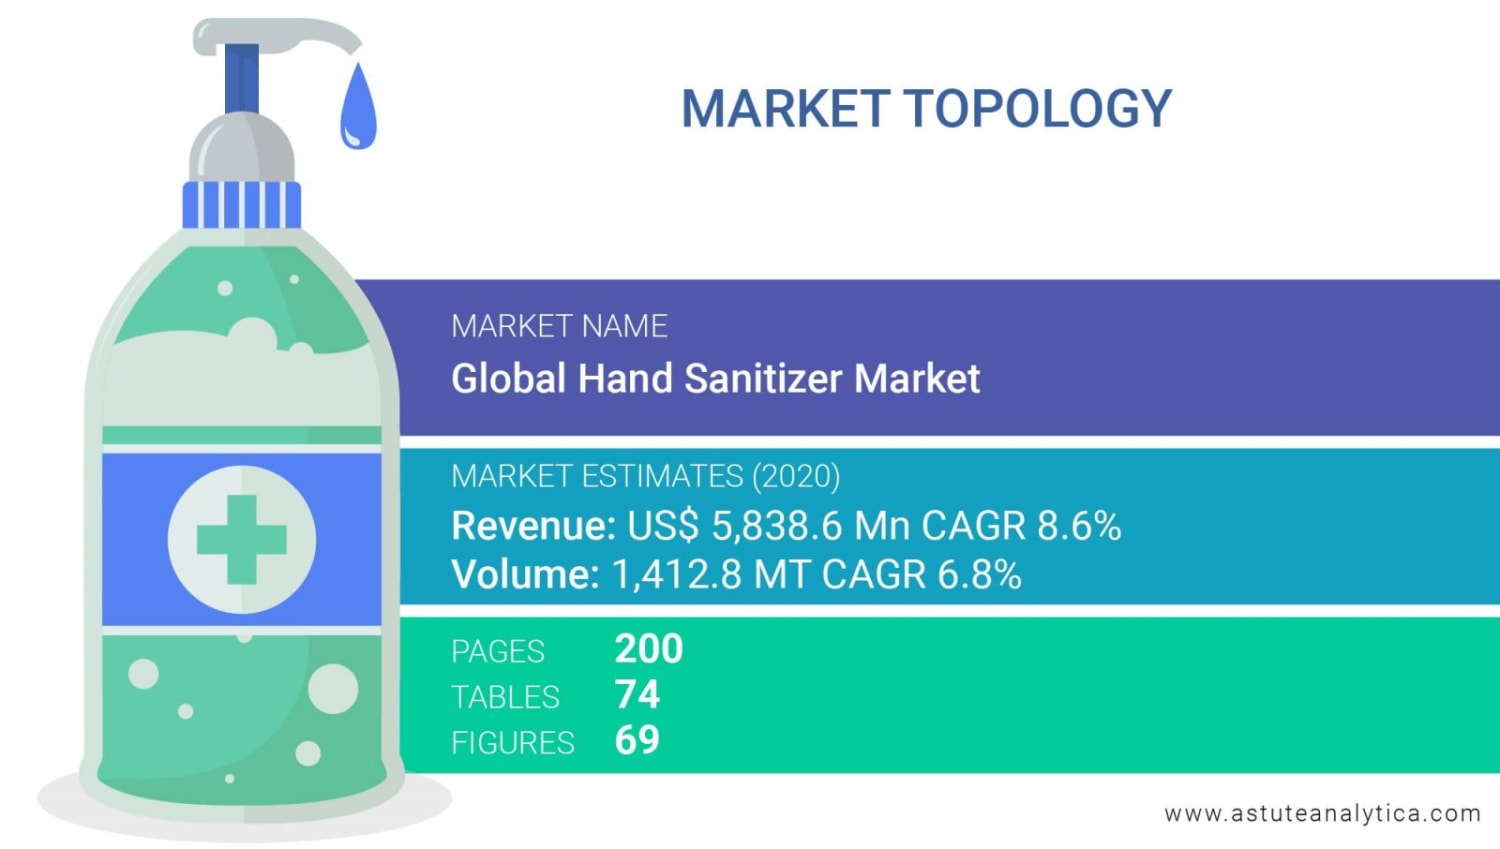 Hand Sanitizer Market - Industry Analysis and Forecast (2021-2027)